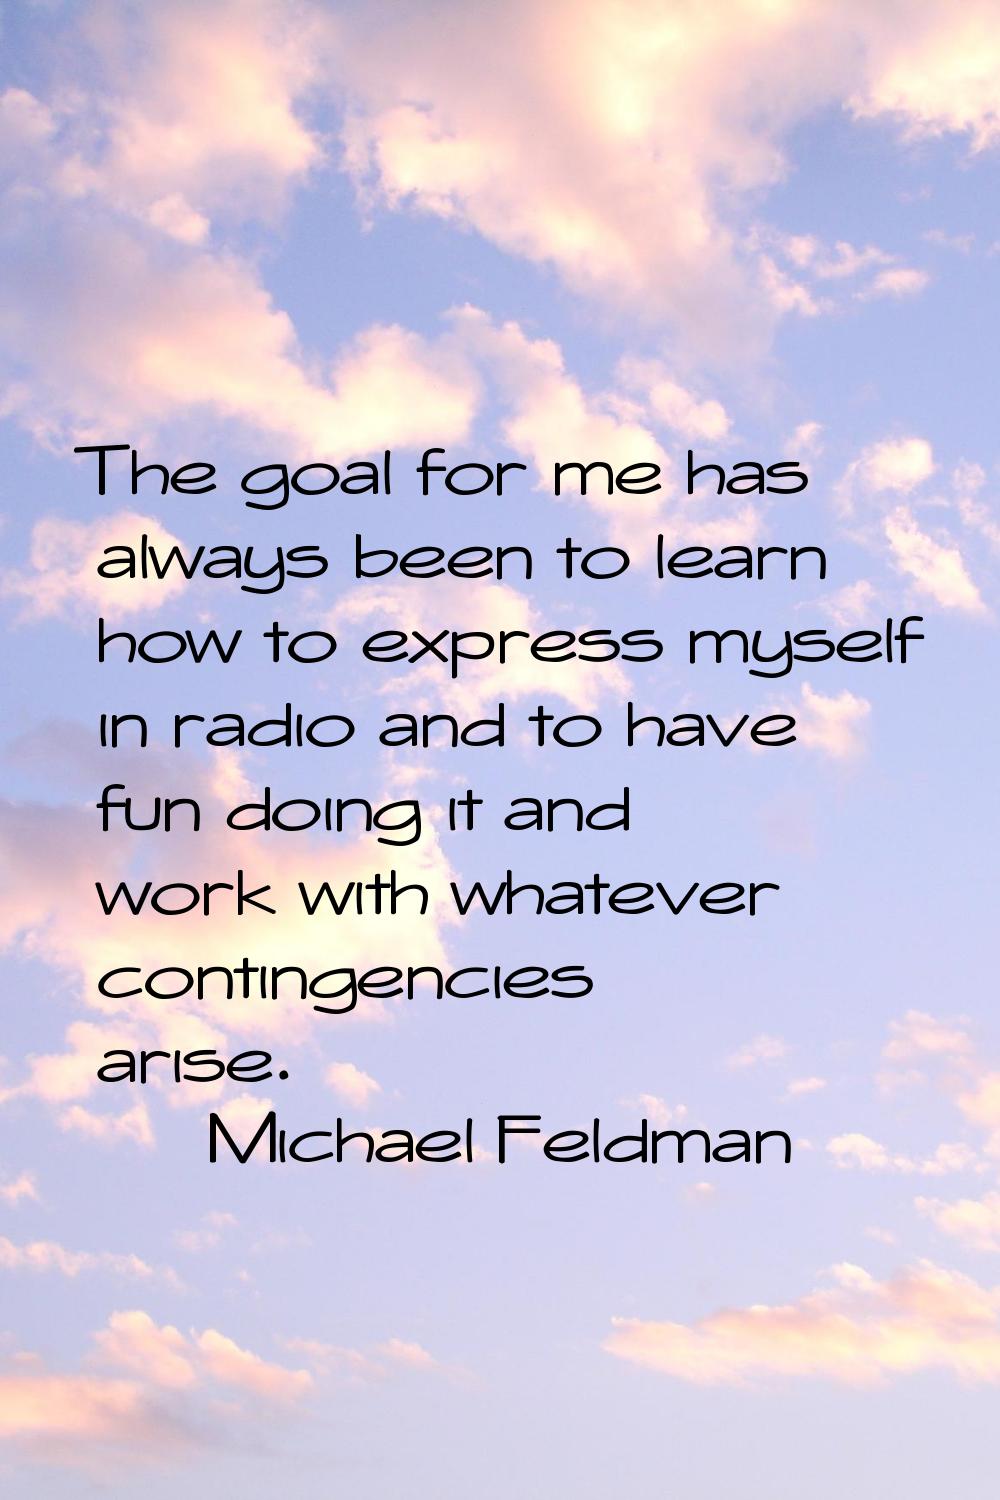 The goal for me has always been to learn how to express myself in radio and to have fun doing it an